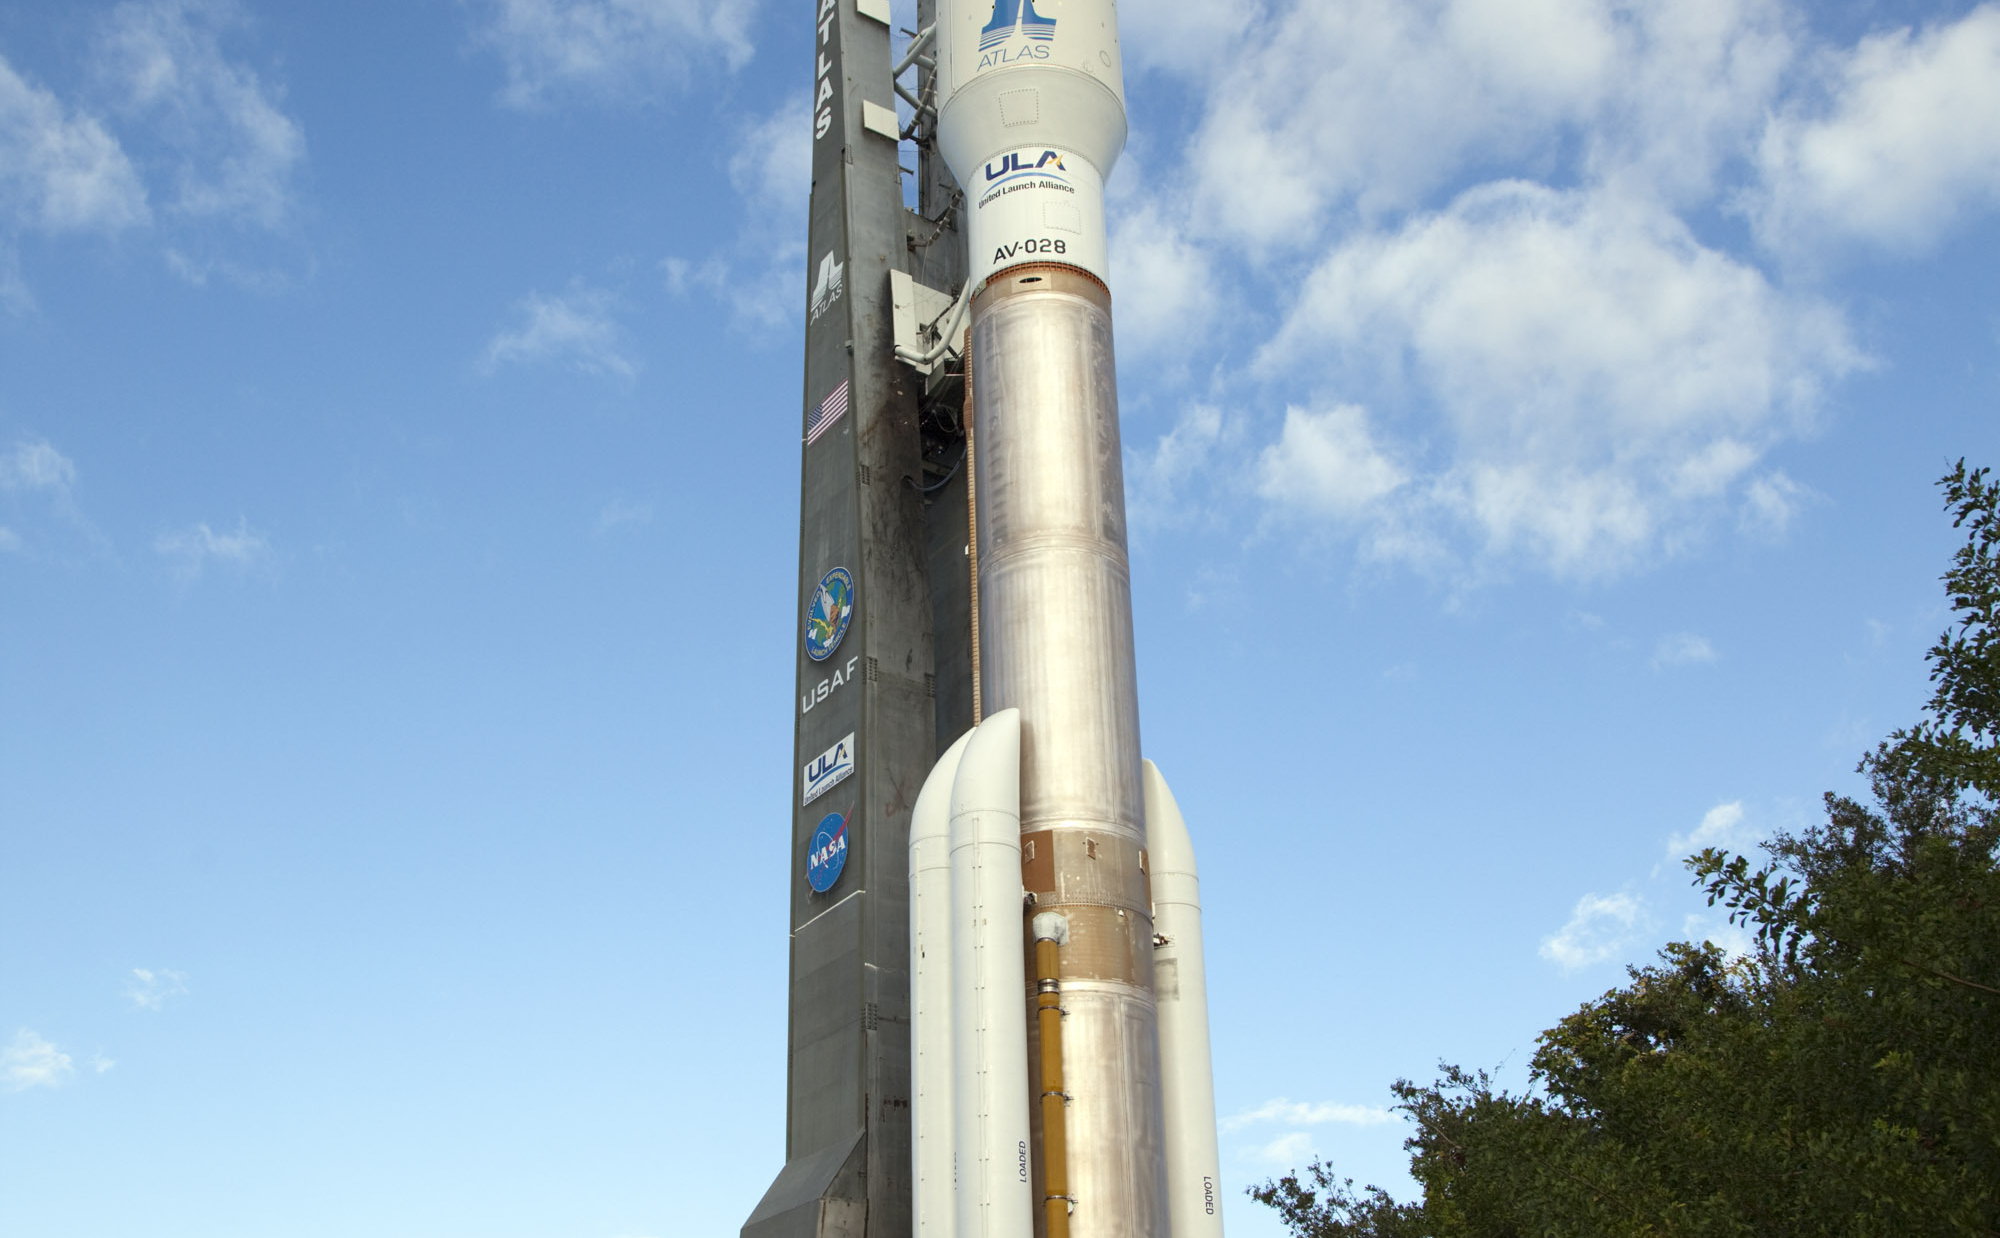 On Cape Canaveral Air Force Station in Florida, the 197-foot-tall United Launch Alliance Atlas V rocket rolls to the launch pad at Space Launch Complex 41.